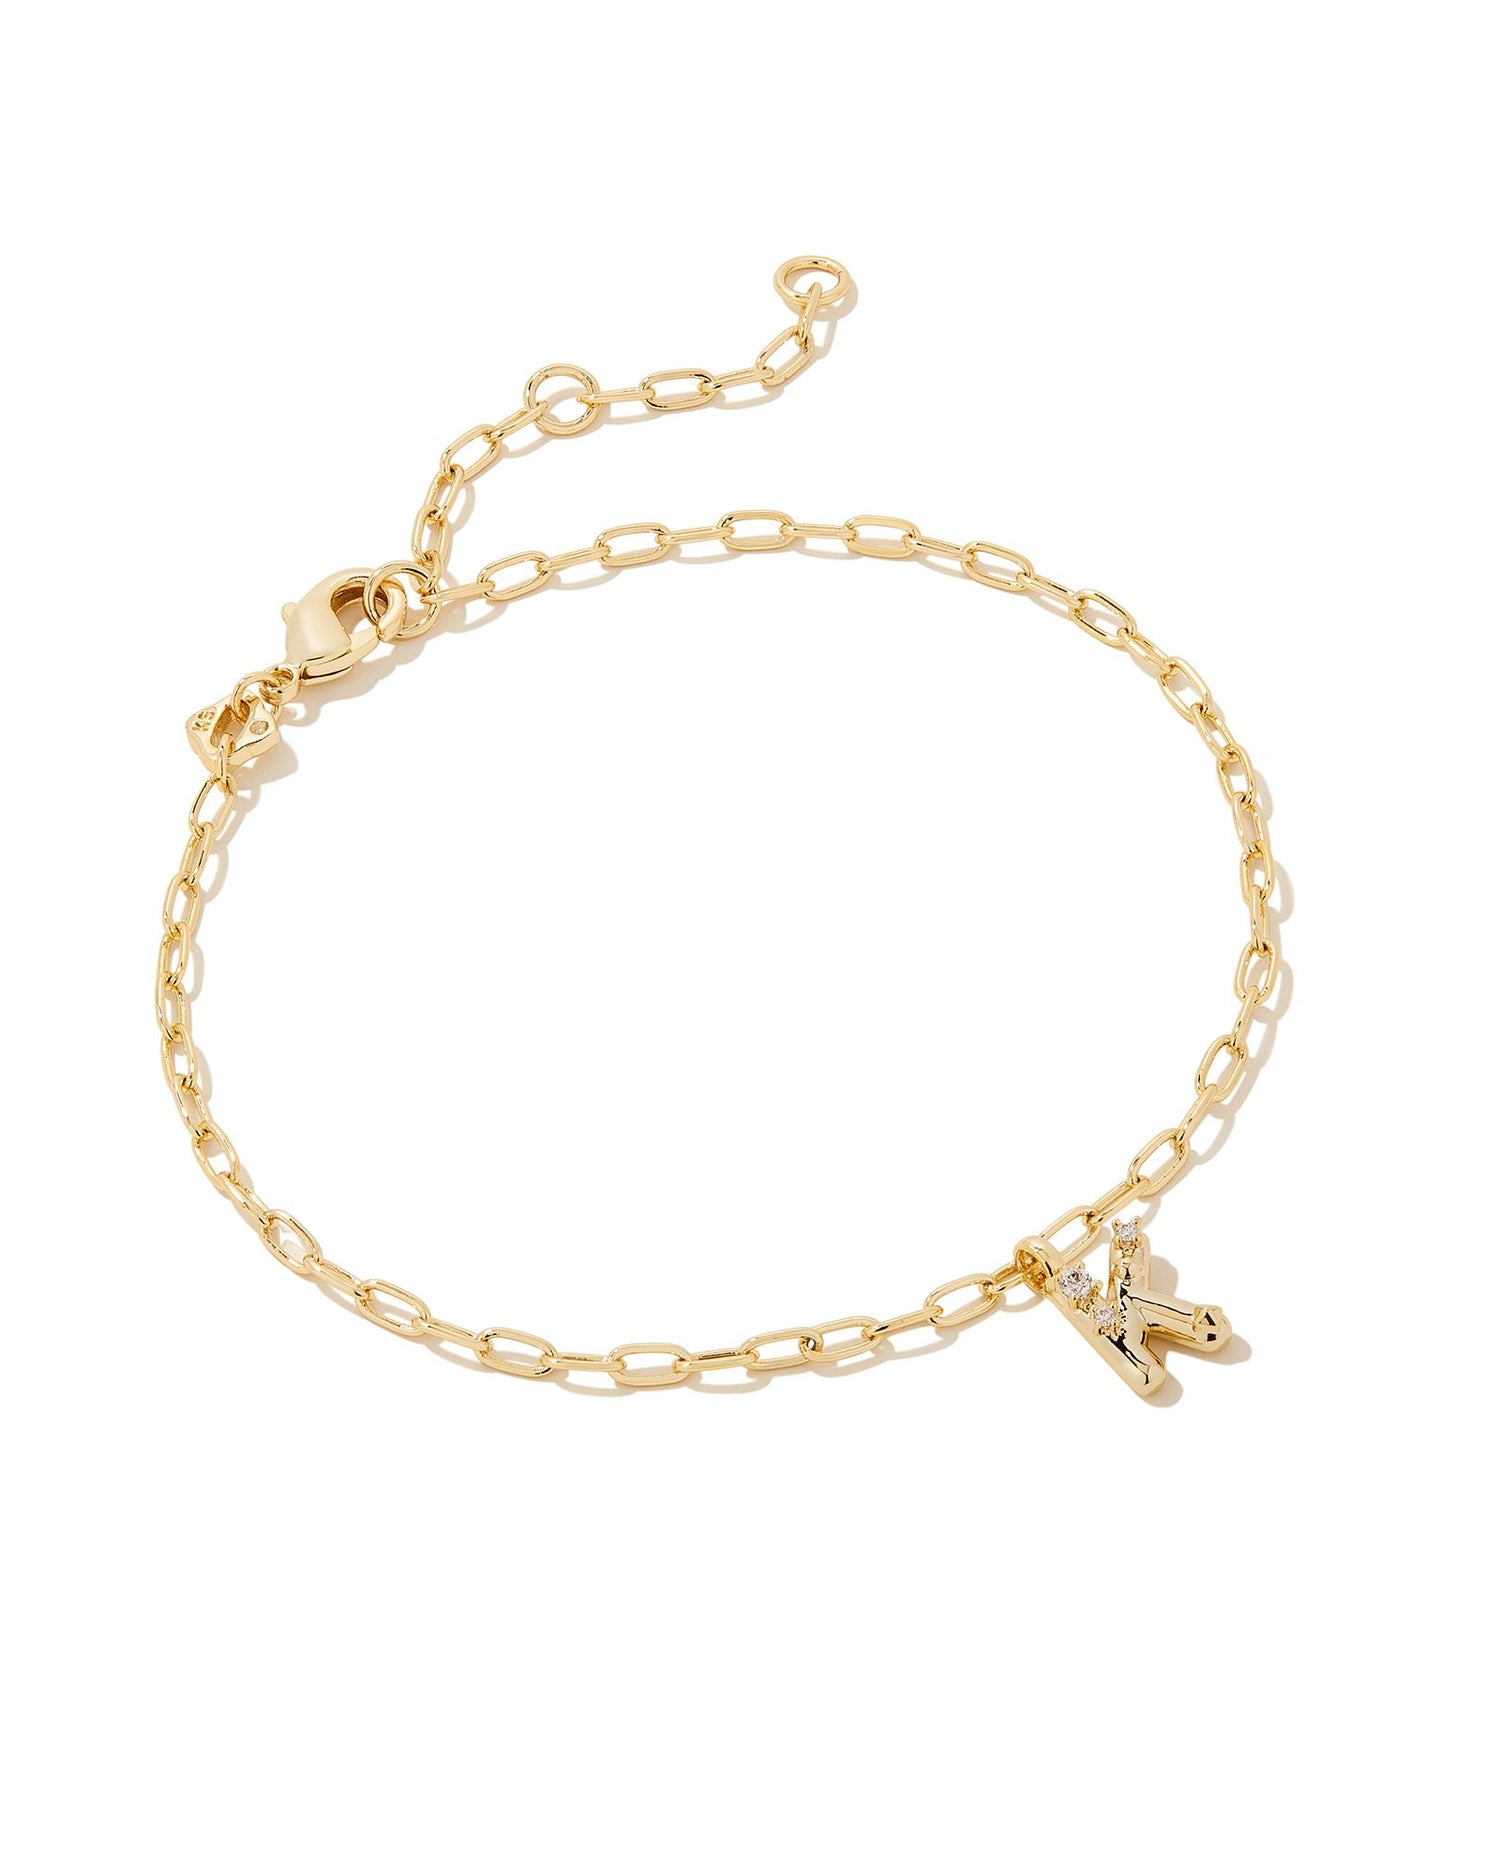 Add a personal touch to your wrist stack with the Crystal Delicate Chain Bracelet in White Crystal, our first Fashion Jewelry initial bracelet. Featuring a dainty chain and letter charm with a hint of sparkle, this bracelet is the perfect way to celebrate the ones you love—including yourself!  Dimensions- 6.5' CHAIN WITH 1.5' EXTENDER, 0.45'L X 0.26"W PENDANT Metal- 14K Gold plated over brass Closure- Lobster Clasp Material-  White CZ Letter K